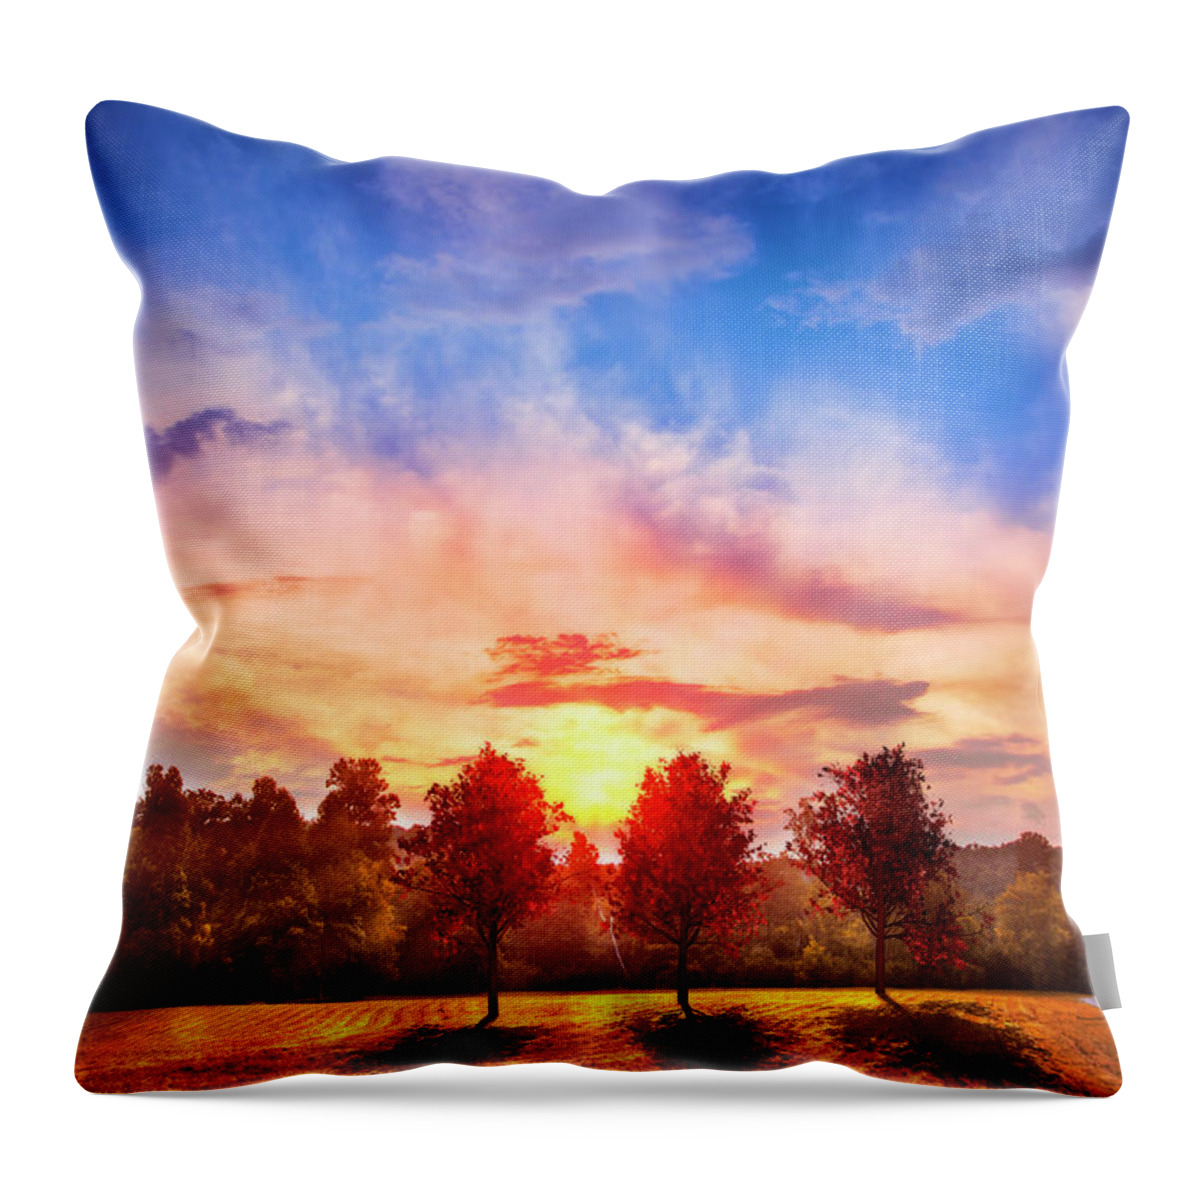 Appalachia Throw Pillow featuring the photograph Red Maples at Sunset by Debra and Dave Vanderlaan